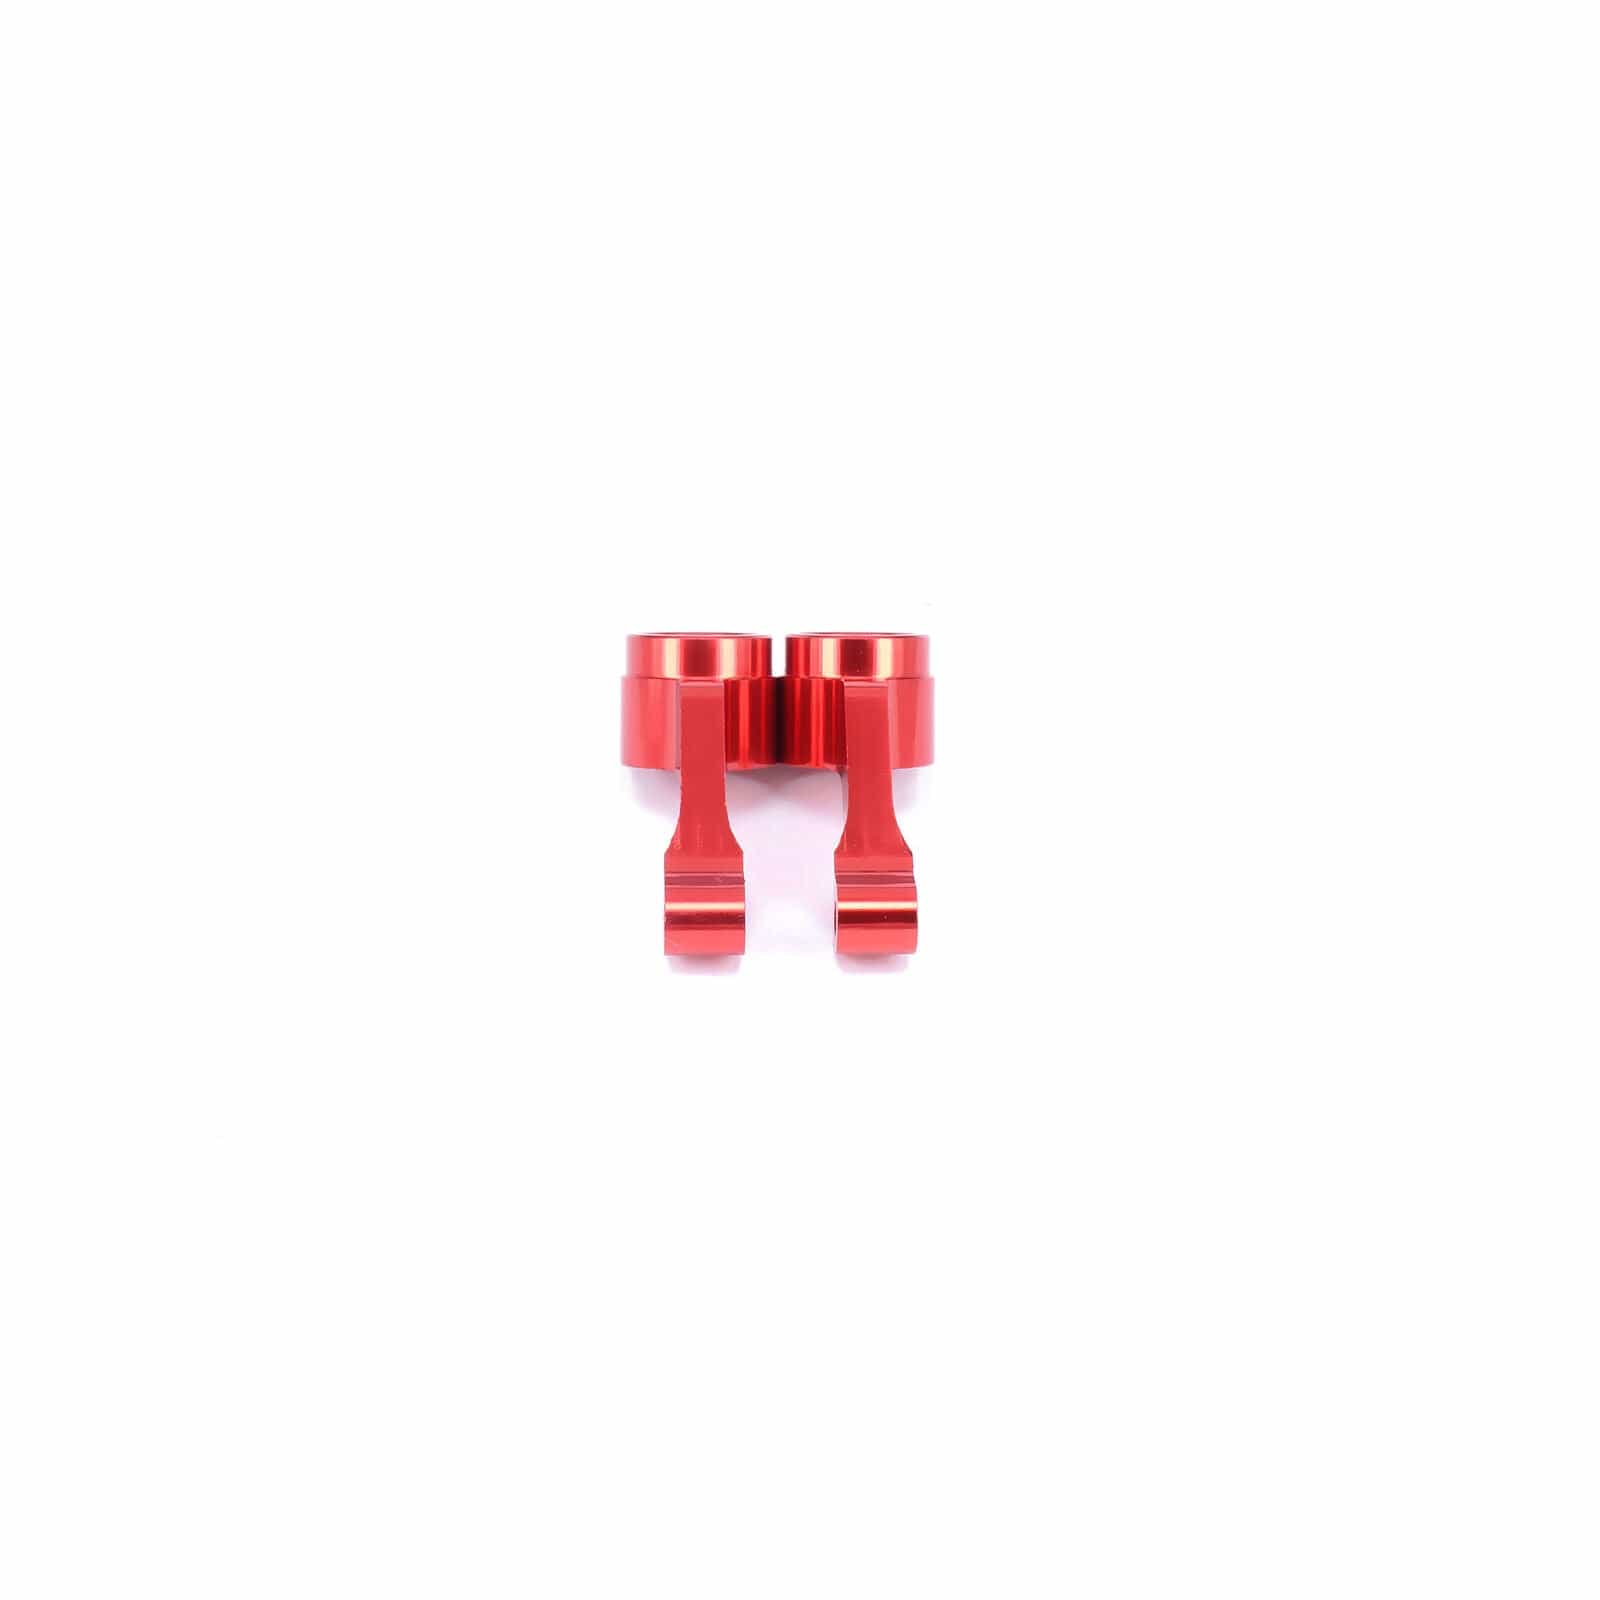 RCAWD TRAXXAS UPGRADE PARTS RCAWD rear stub axle carriers for 1/10 traxxas slash VXL 4x4 4WD XL5 Red